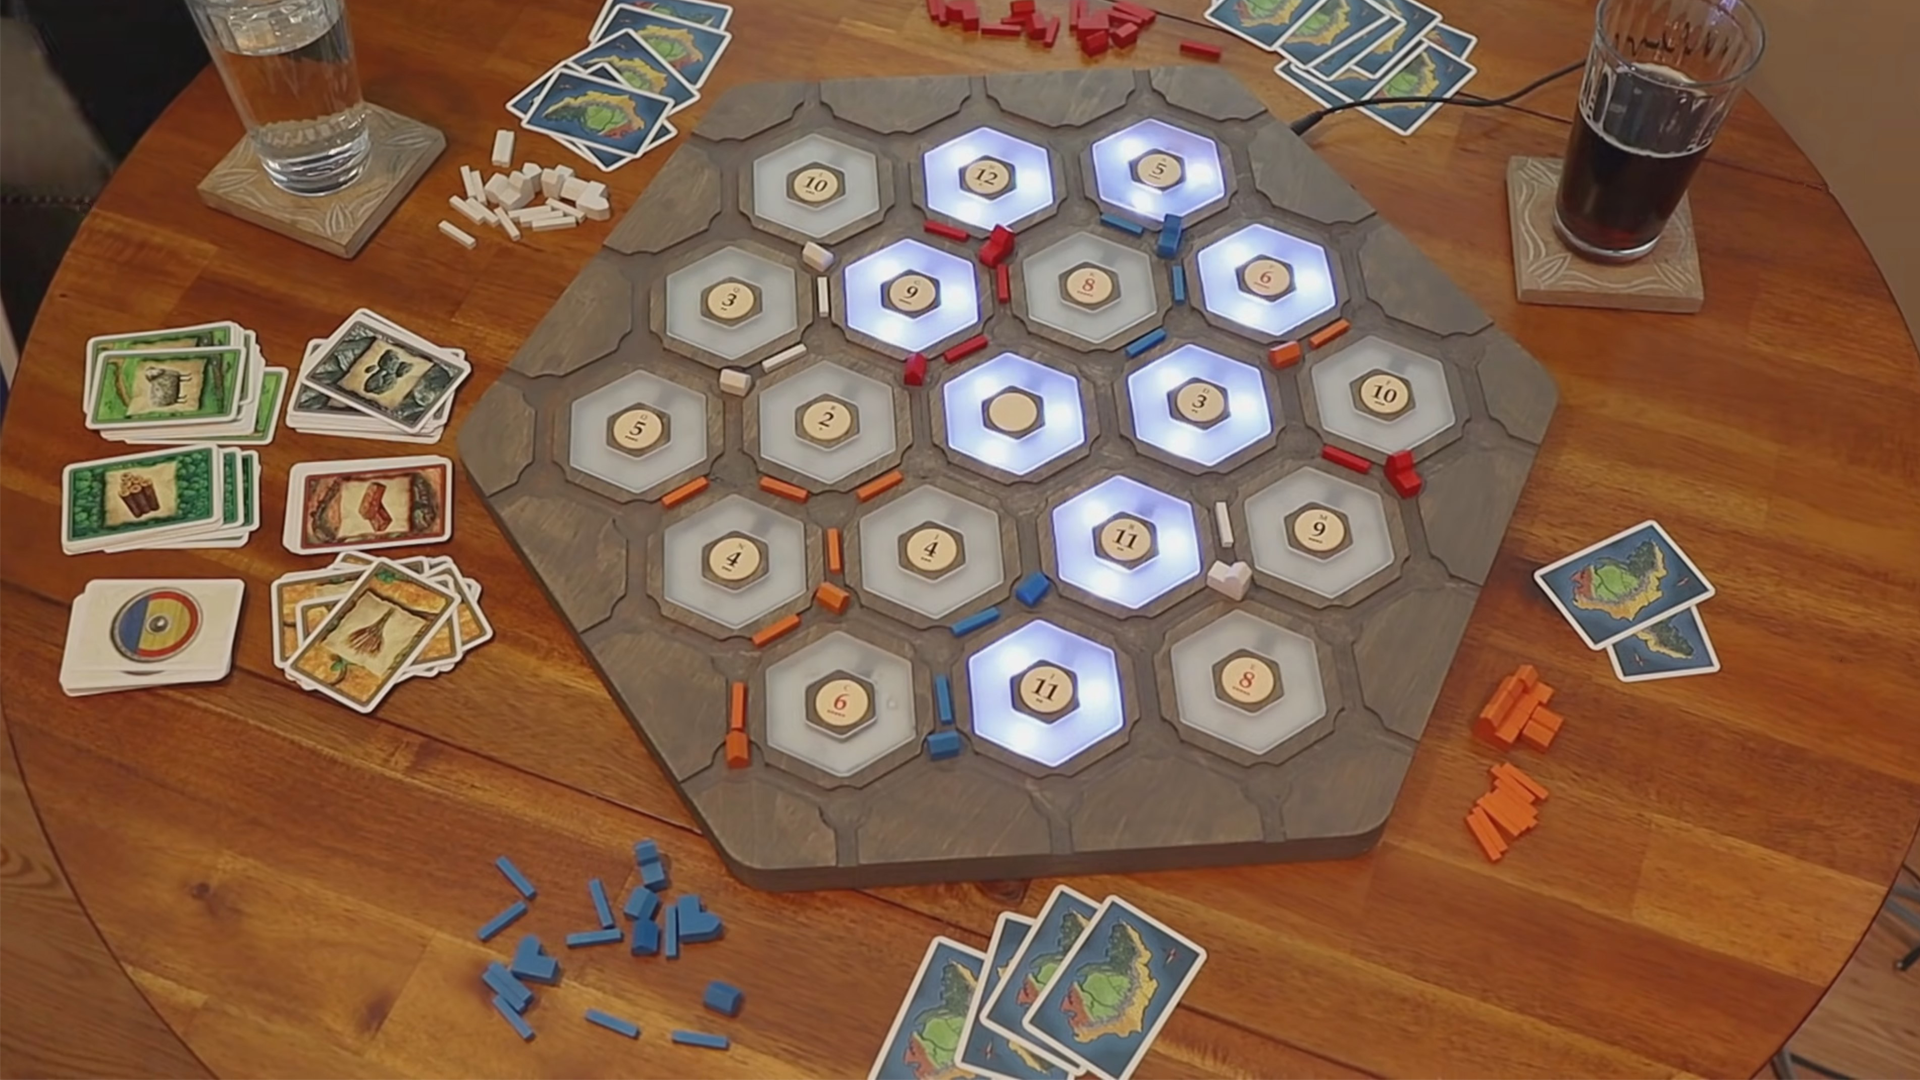 This ‘Catan’ Board Game Rolls for You, Lights Up the Resources You Need